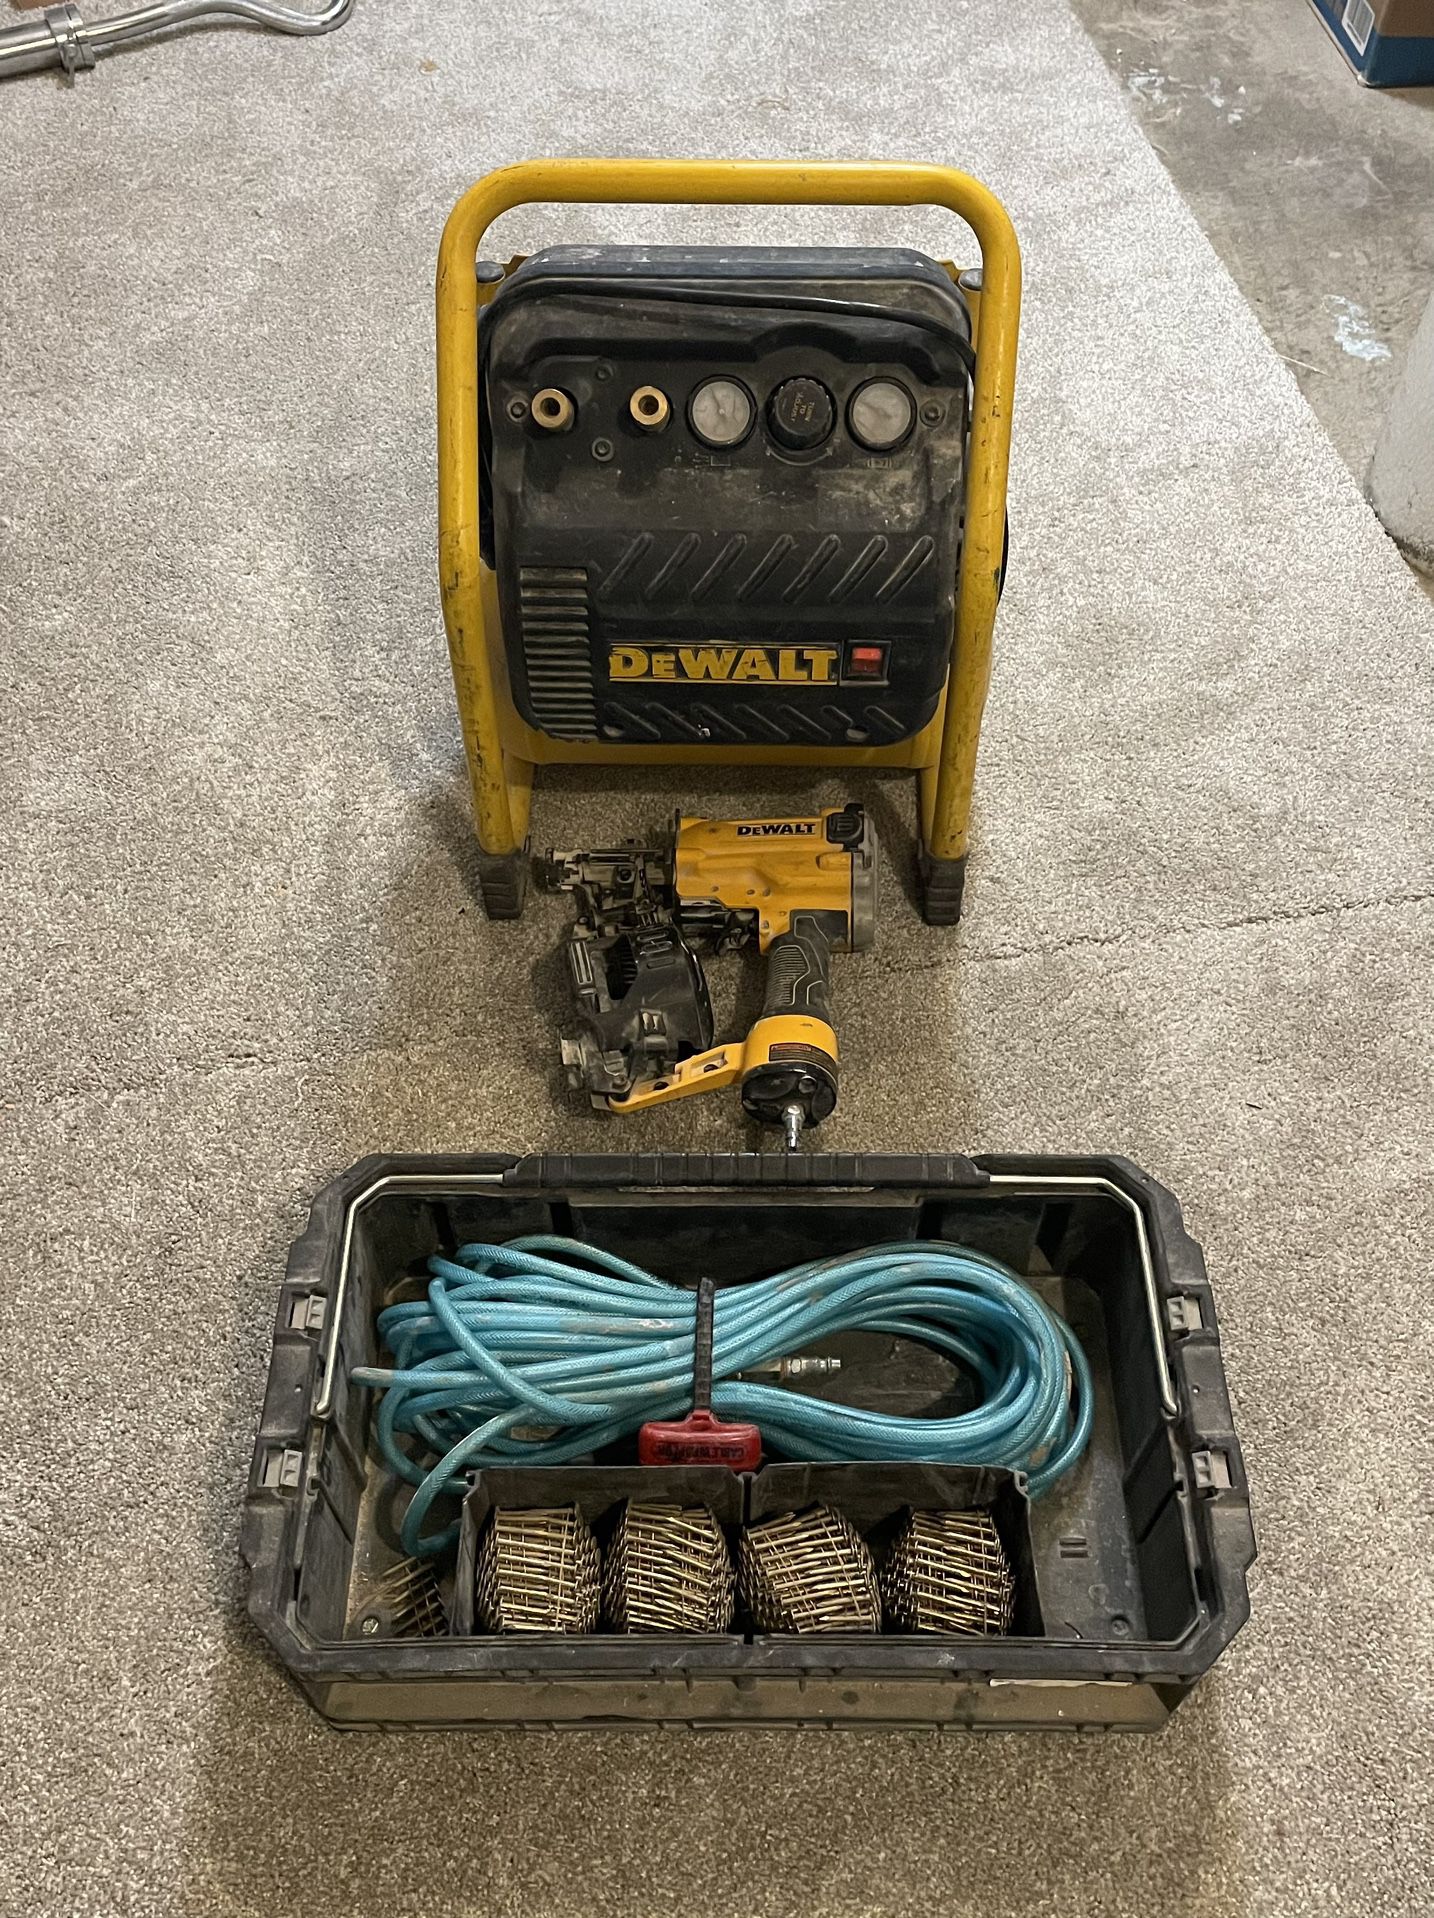 DEWALT Air Compressor for Trim, Quiet Operation with Coil Roofing Nailer, Polyurethane Air Hose Husky and 1000 Count Siding Nails 1-1/4 Inch